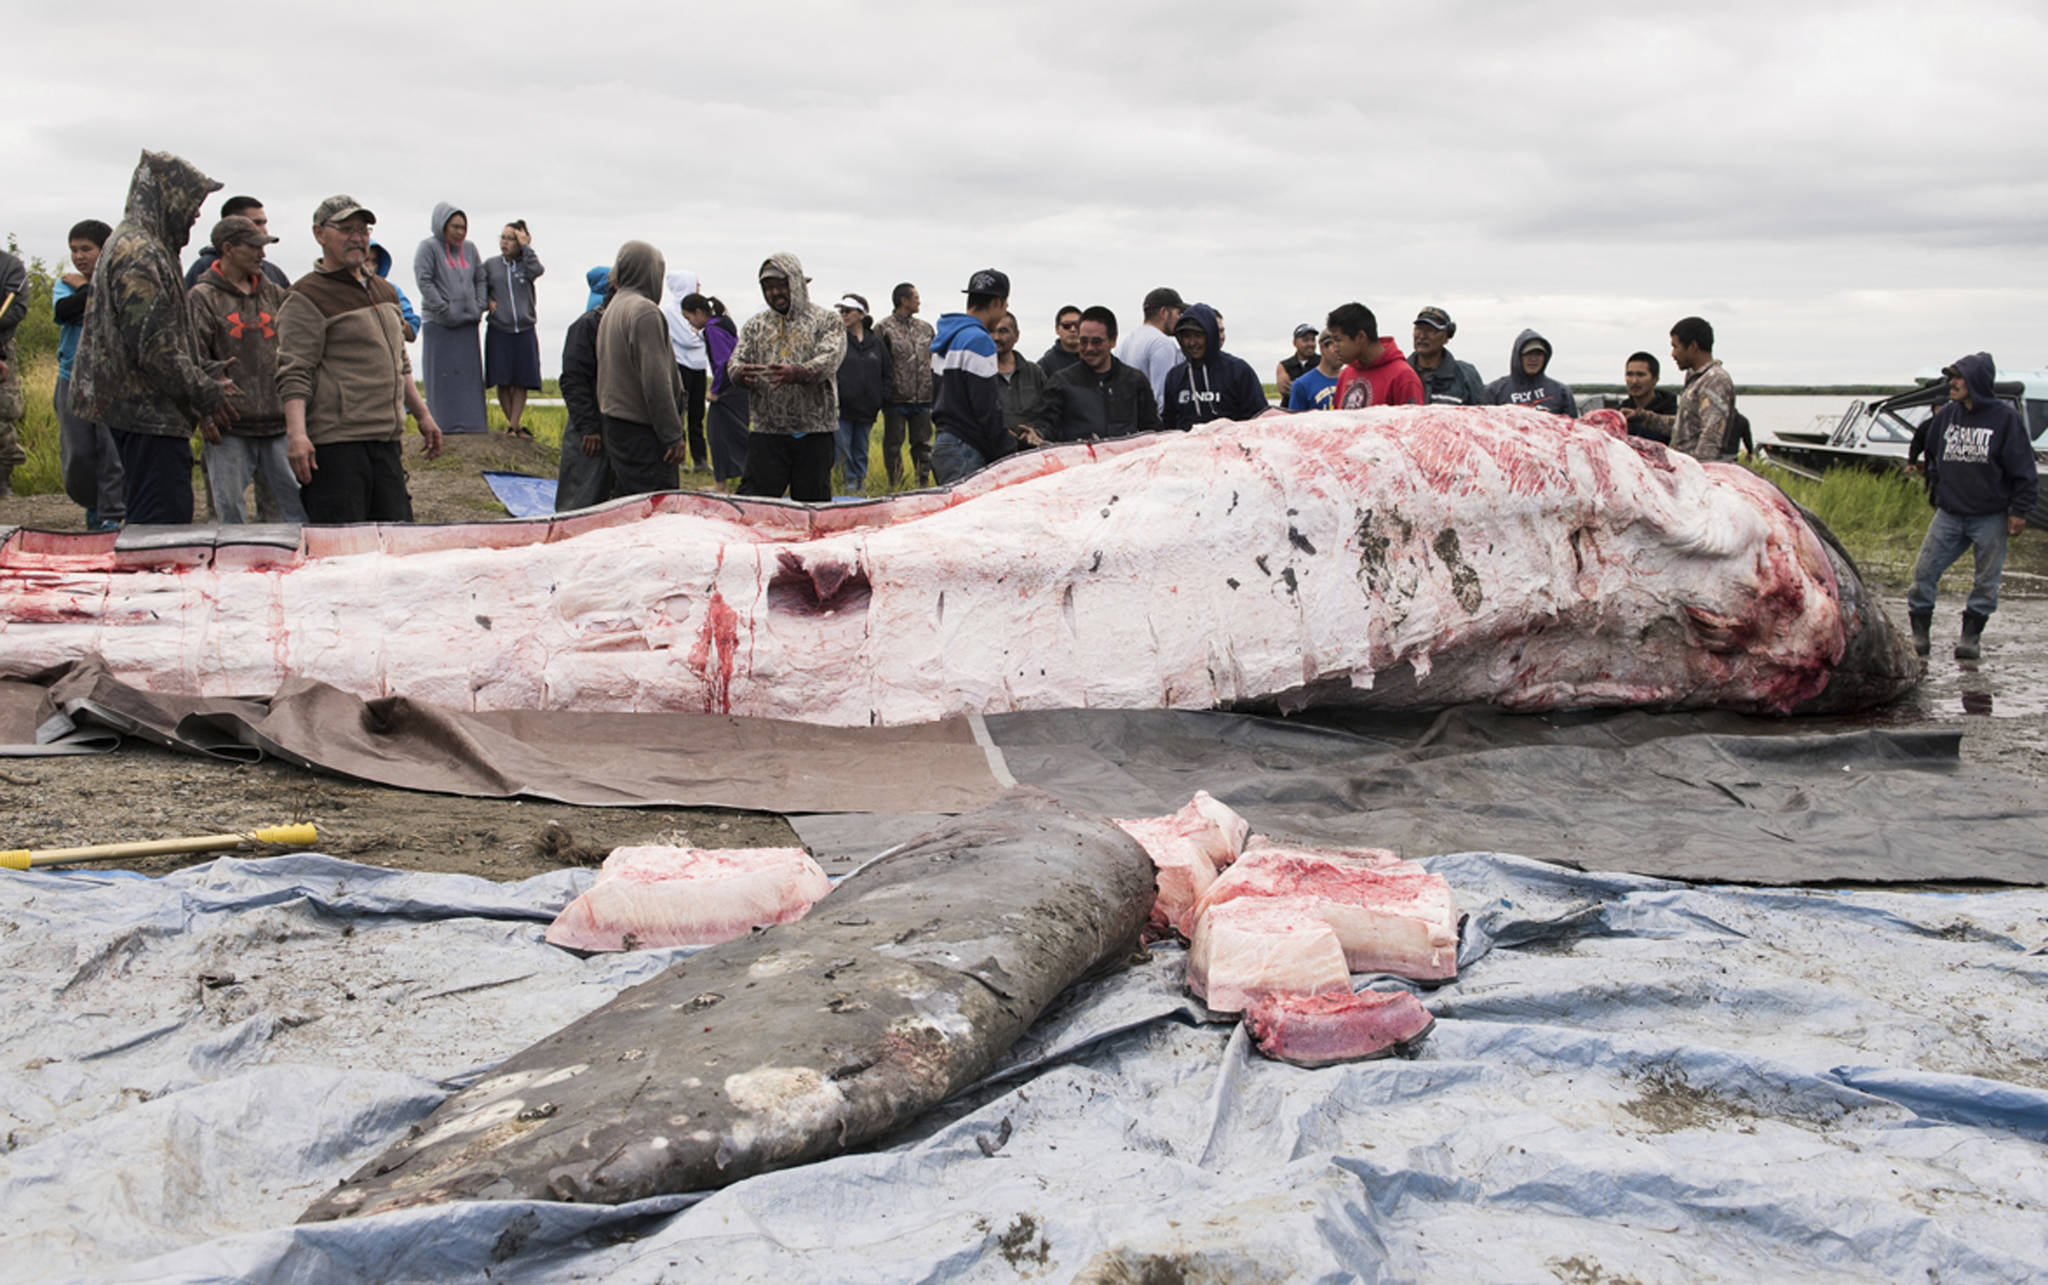 In this Saturday photo provided by KYUK Public Media, a gray whale killed in the Kuskokwim River is butchered and the meat and blubber distributed in Napaskiak. (Katie Basile/ KYUK Public Media via AP)